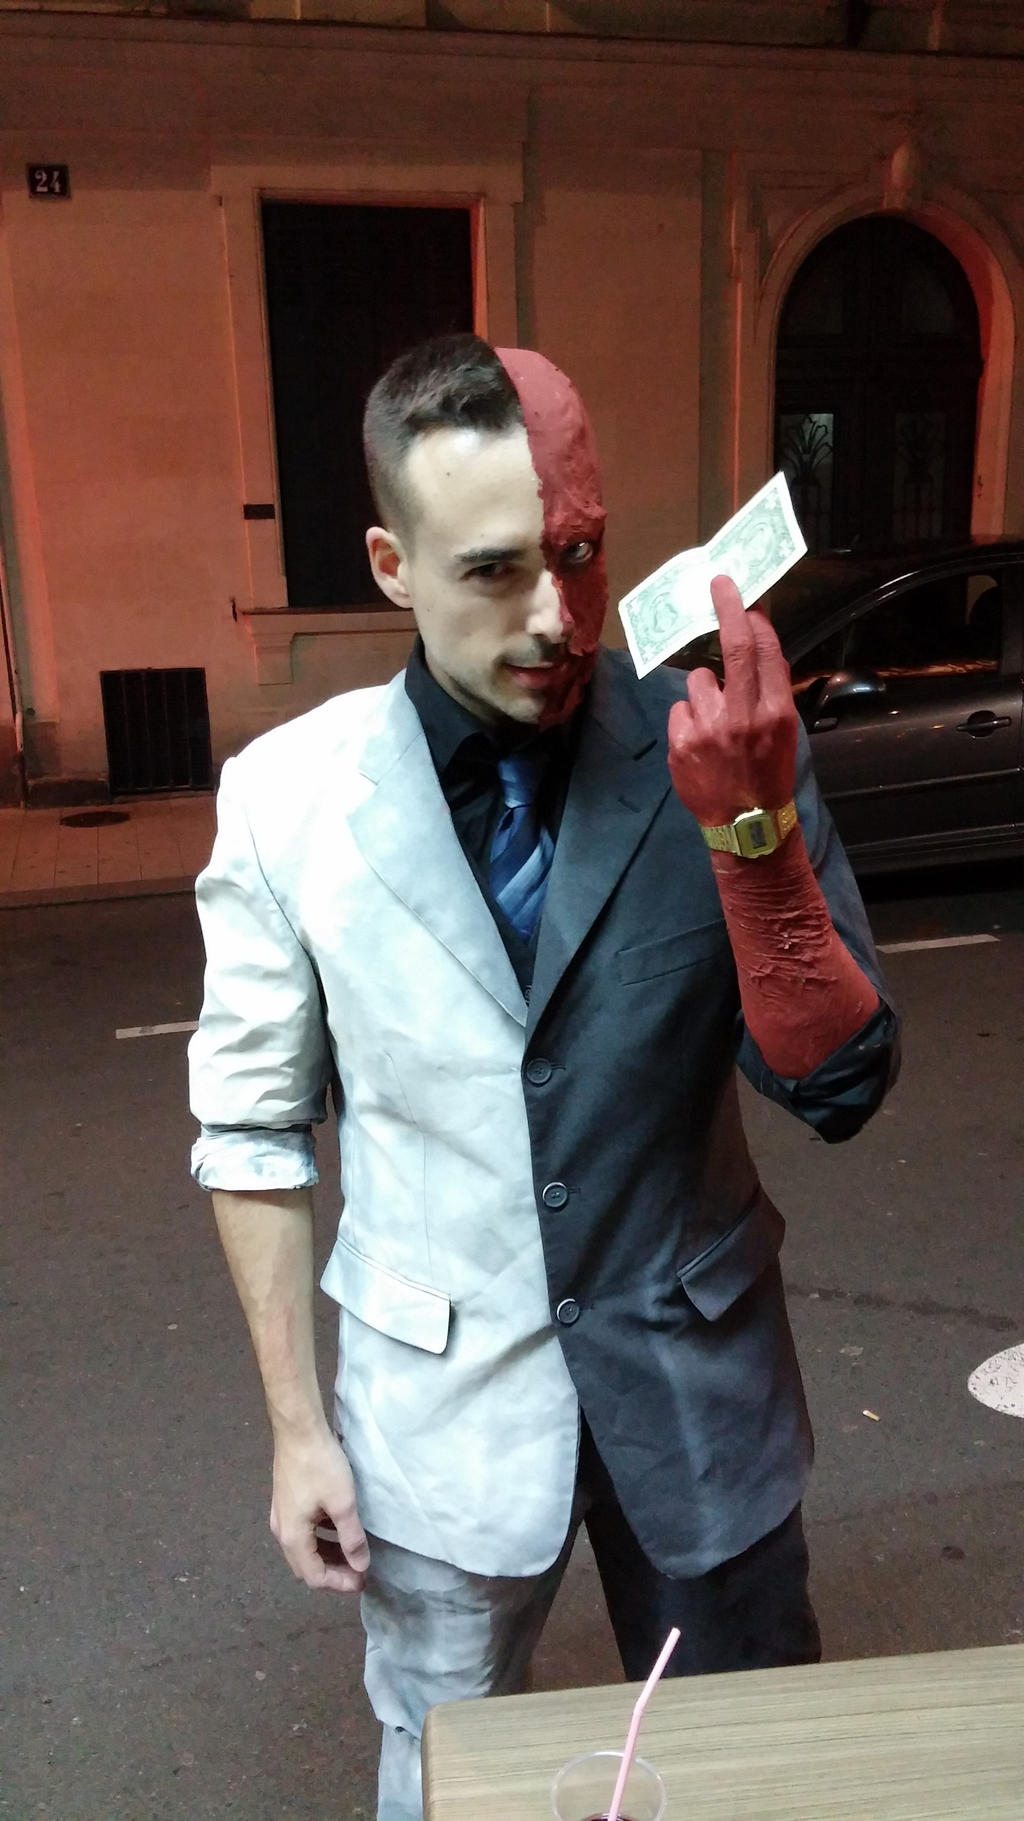 Two-face from Batman Arkham Knight cosplay by James--C on DeviantArt